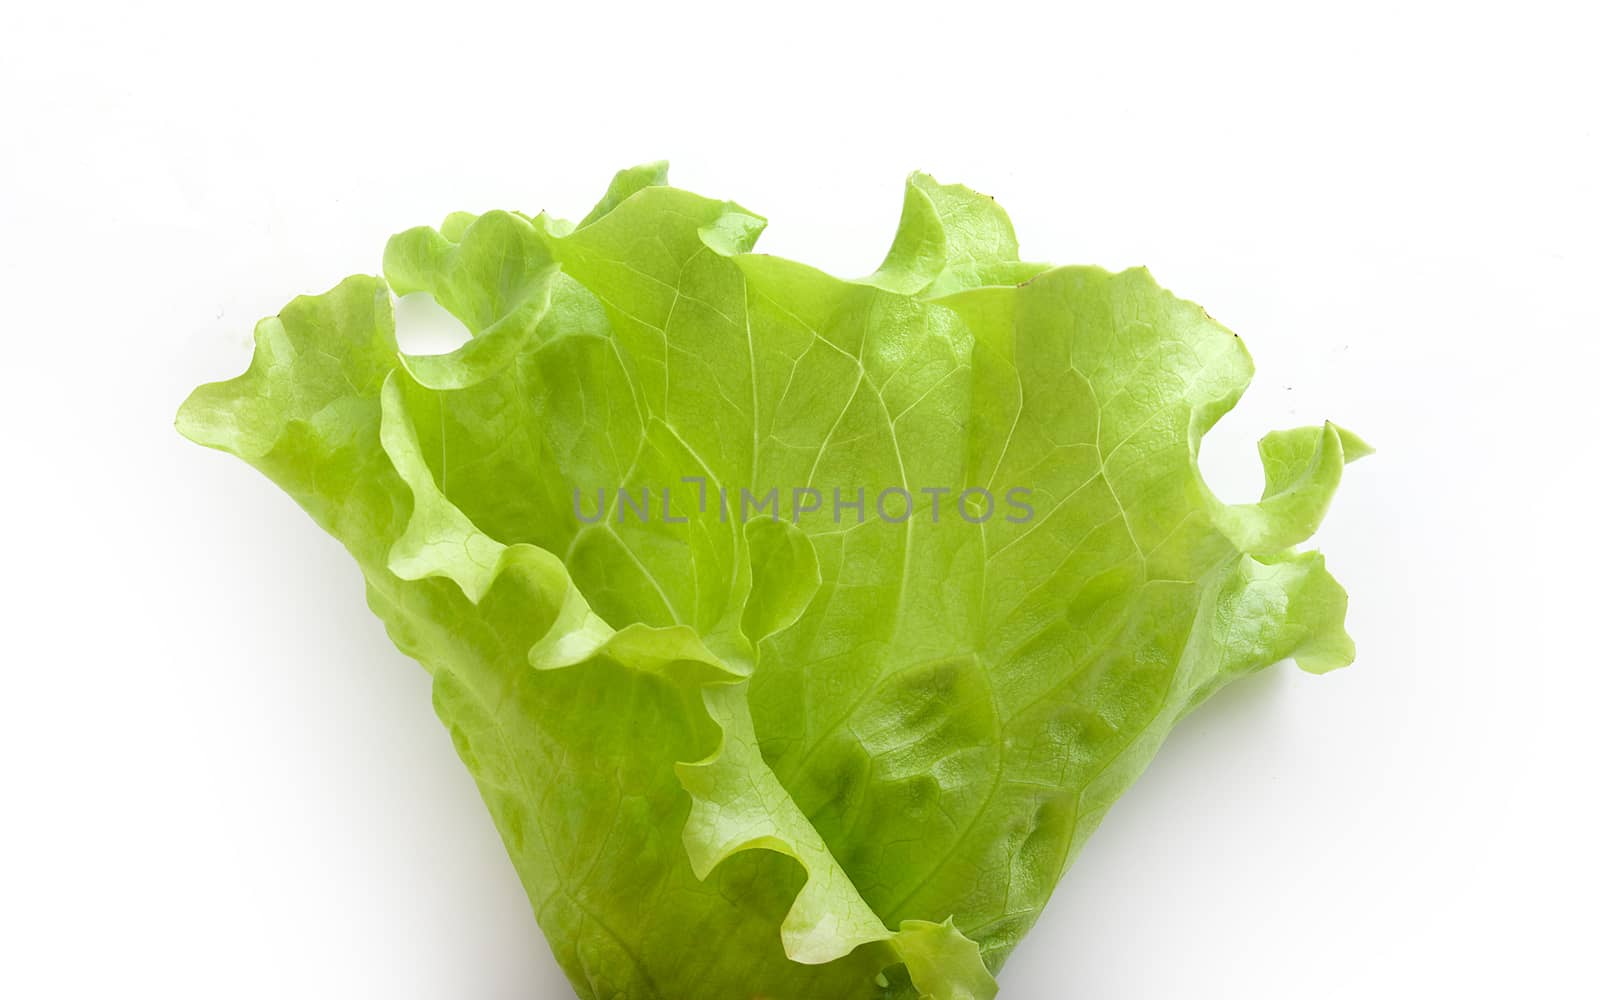 Top view of fresh green lettuce on the white background